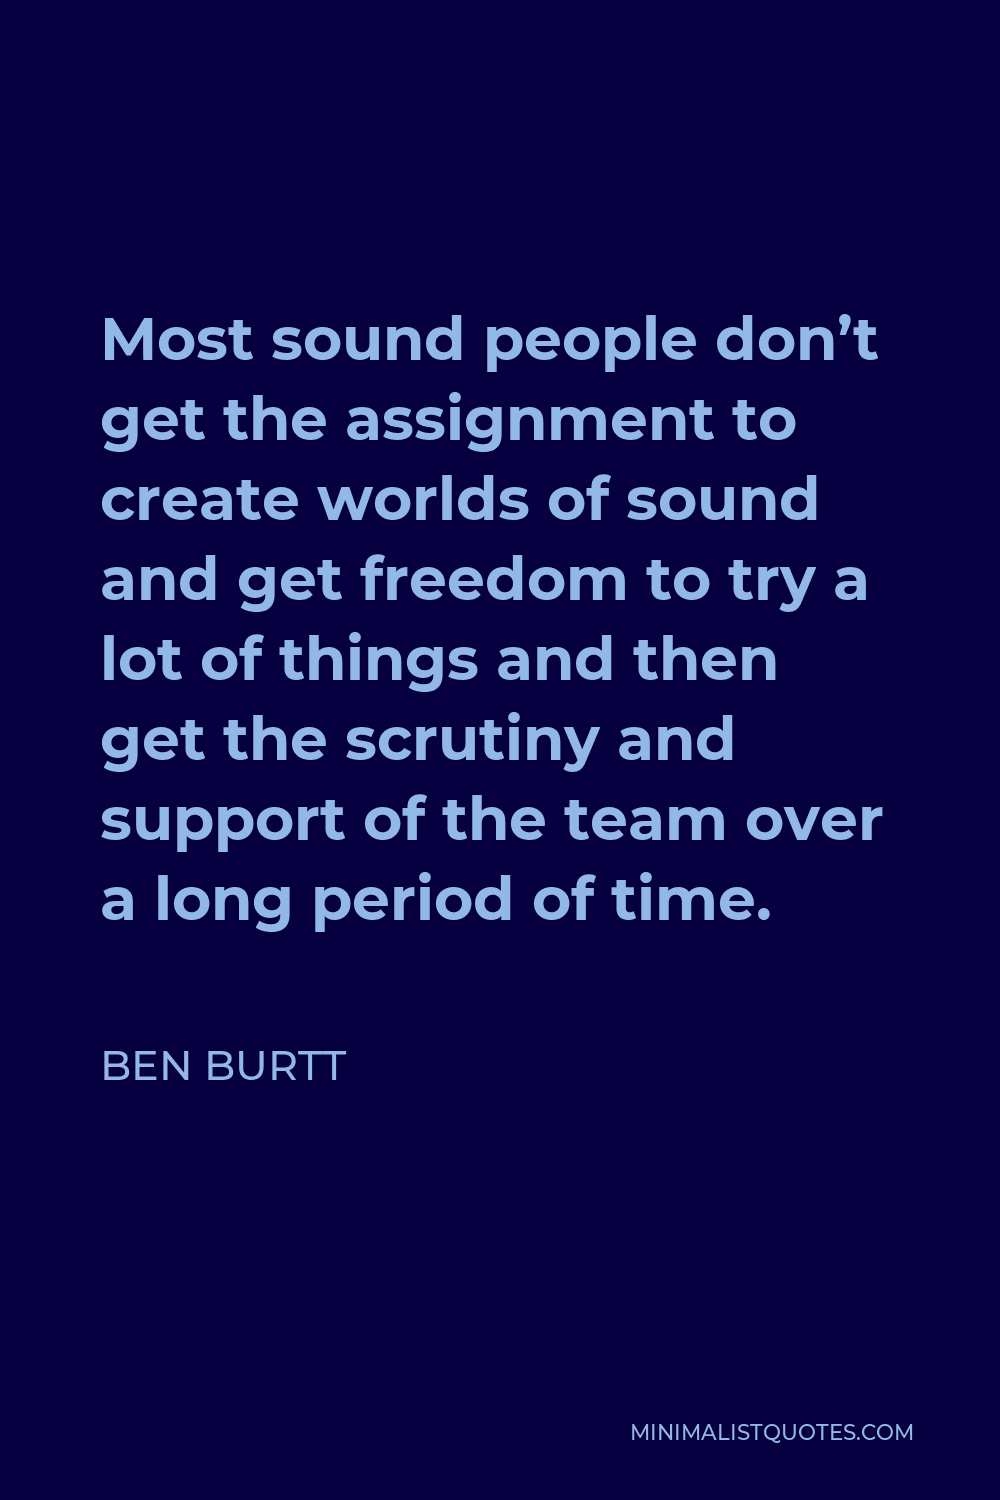 Ben Burtt Quote - Most sound people don’t get the assignment to create worlds of sound and get freedom to try a lot of things and then get the scrutiny and support of the team over a long period of time.